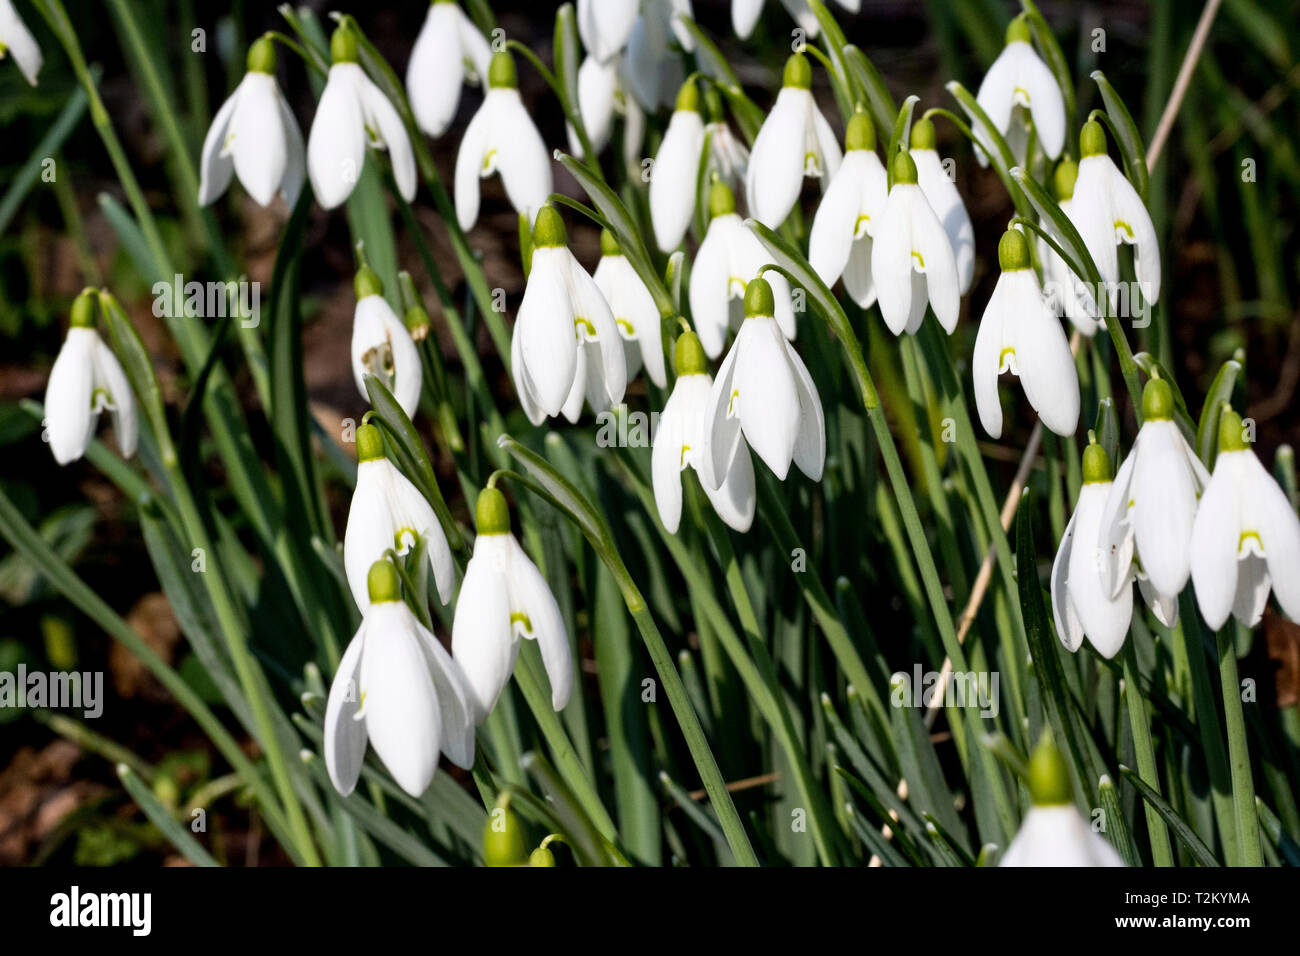 Close-up detail of a group of Snowdrops (Galanthus nivalis) growing in a woodland clearing in North Devon. Winter sunshine brightens them. Stock Photo